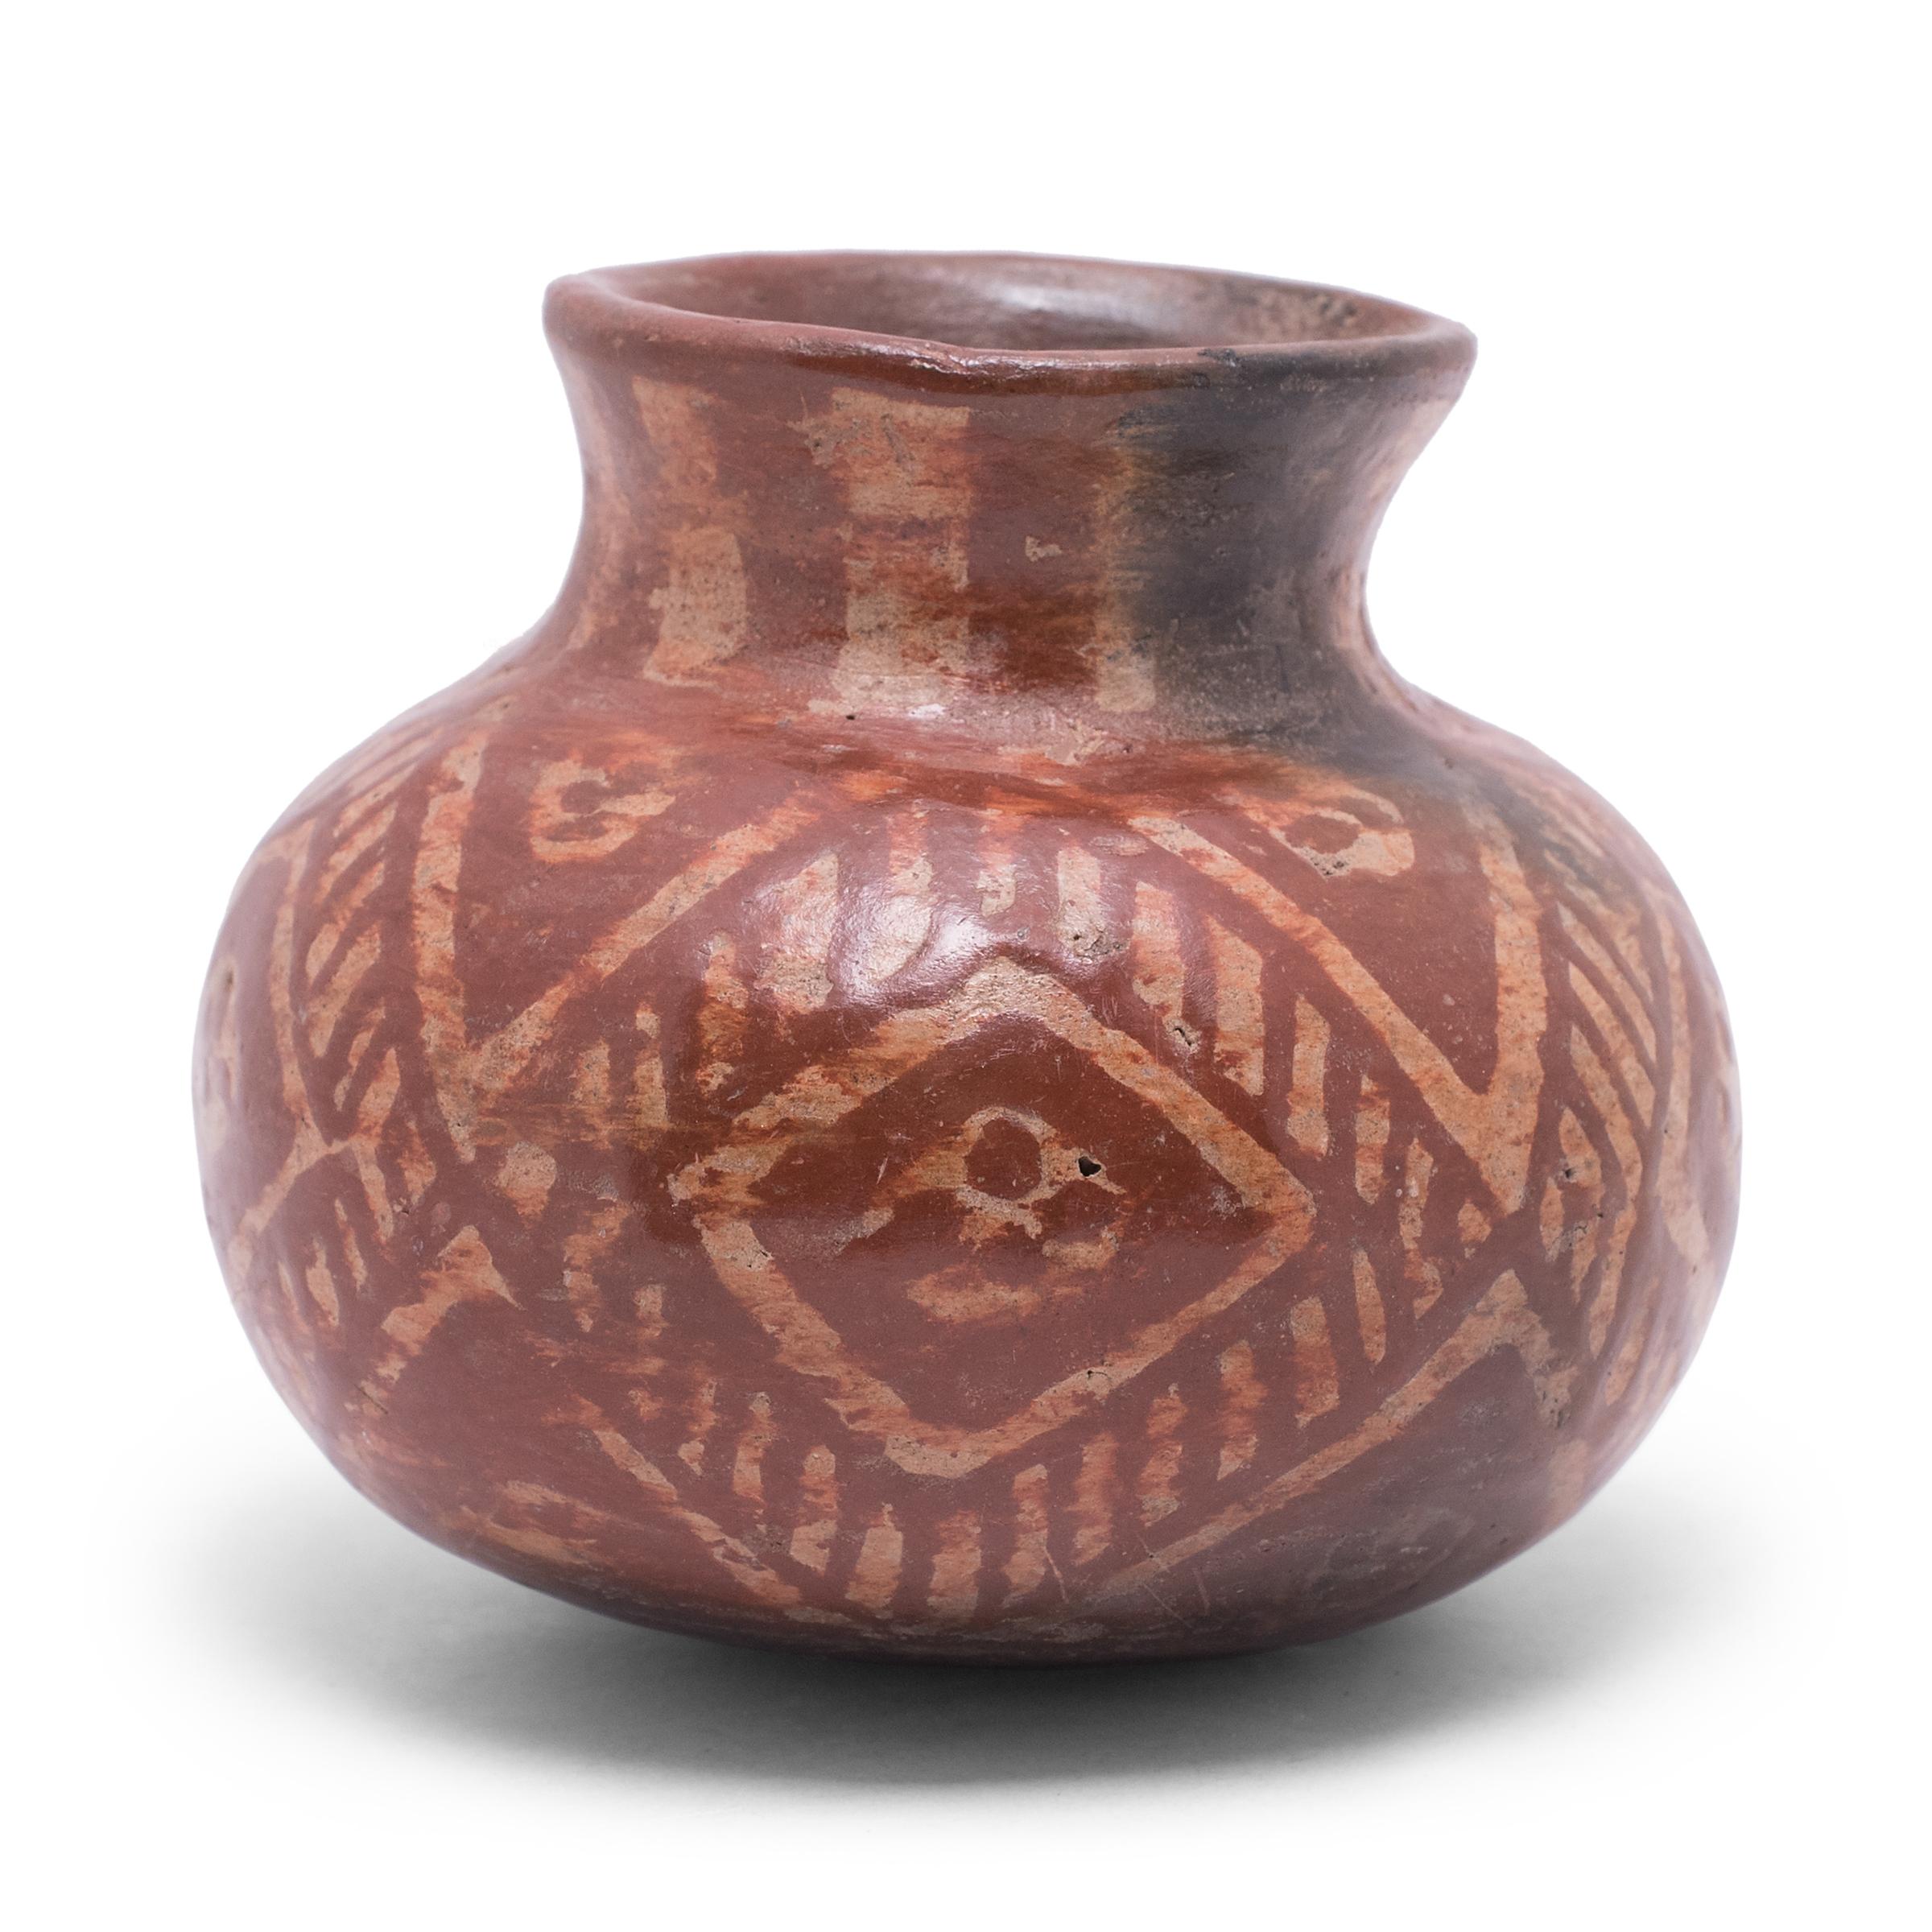 This little jar is a beautiful example of Mesoamerican pottery, decorated with red and white slip clay in the style of Chupícuaro ware. The olla vessel has a globular body with a rounded base, constricted neck, and slightly flared lip. The exterior